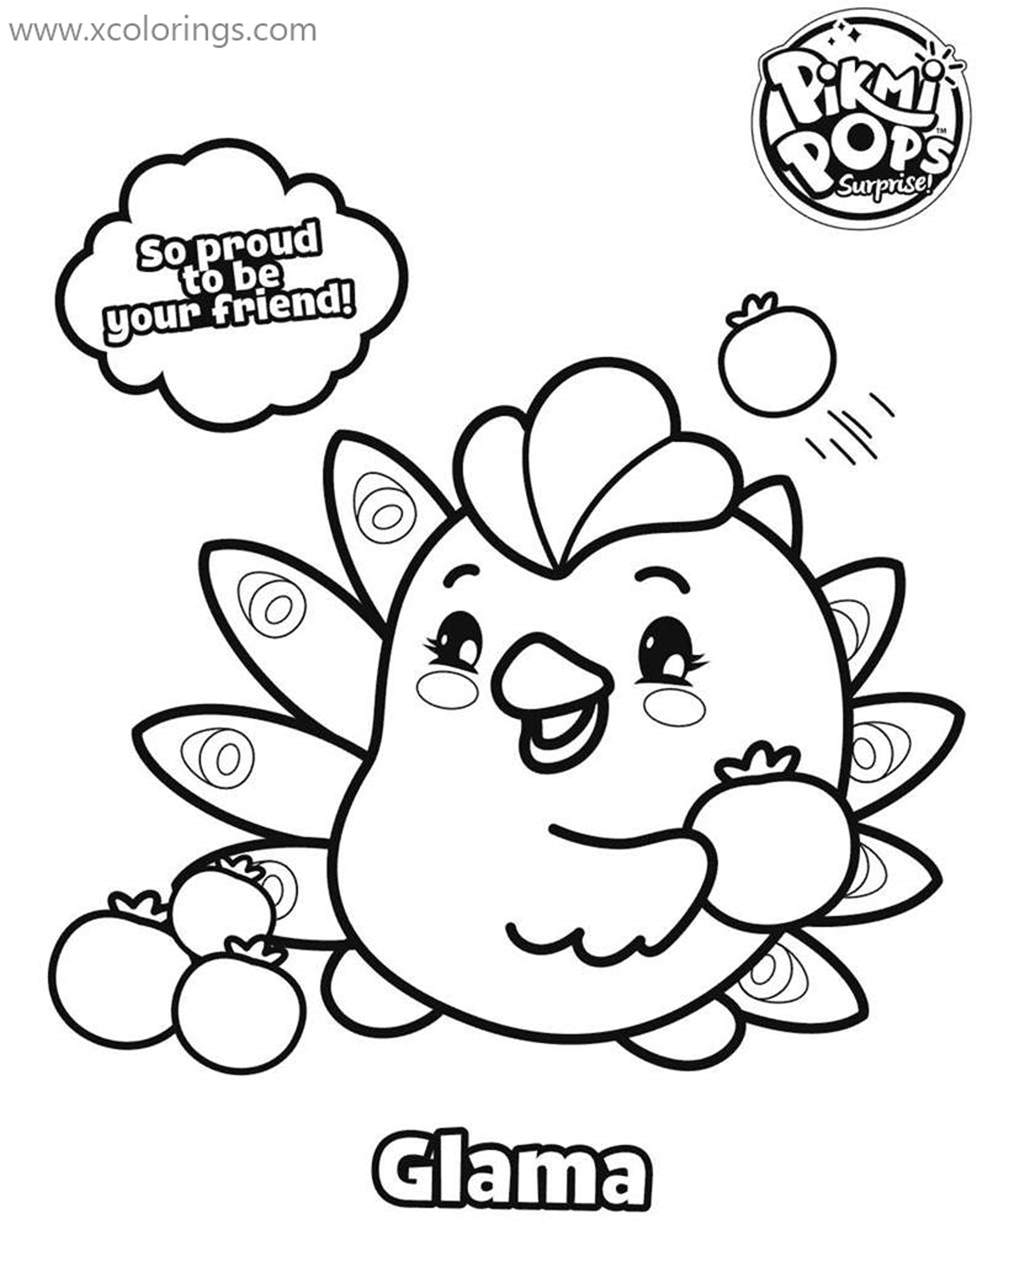 Free Glama from Pikmi Pops Coloring Pages printable